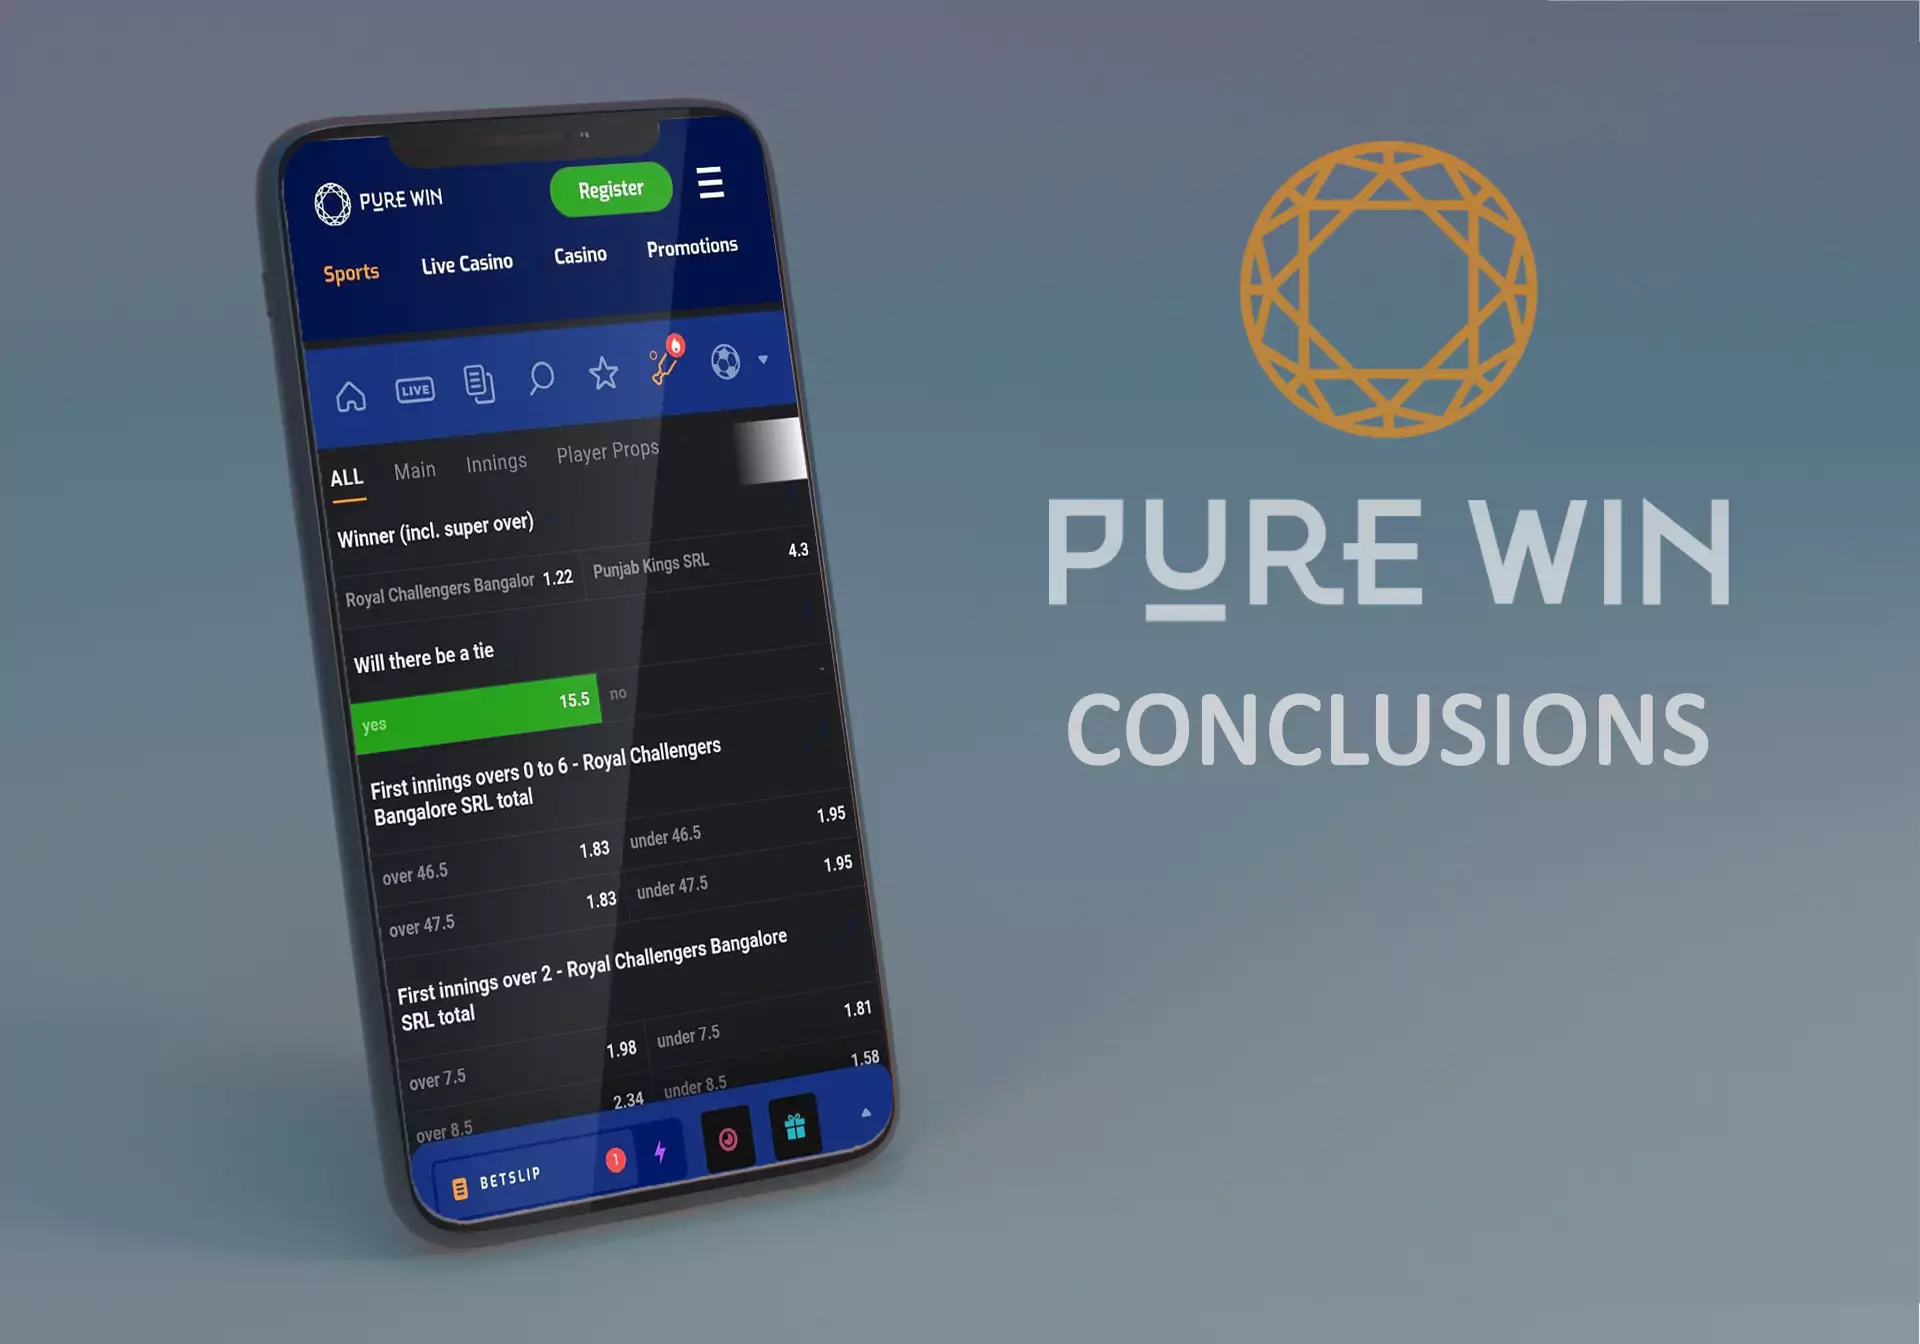 Read about the main benefits of the Pure Win application in our conclusions.